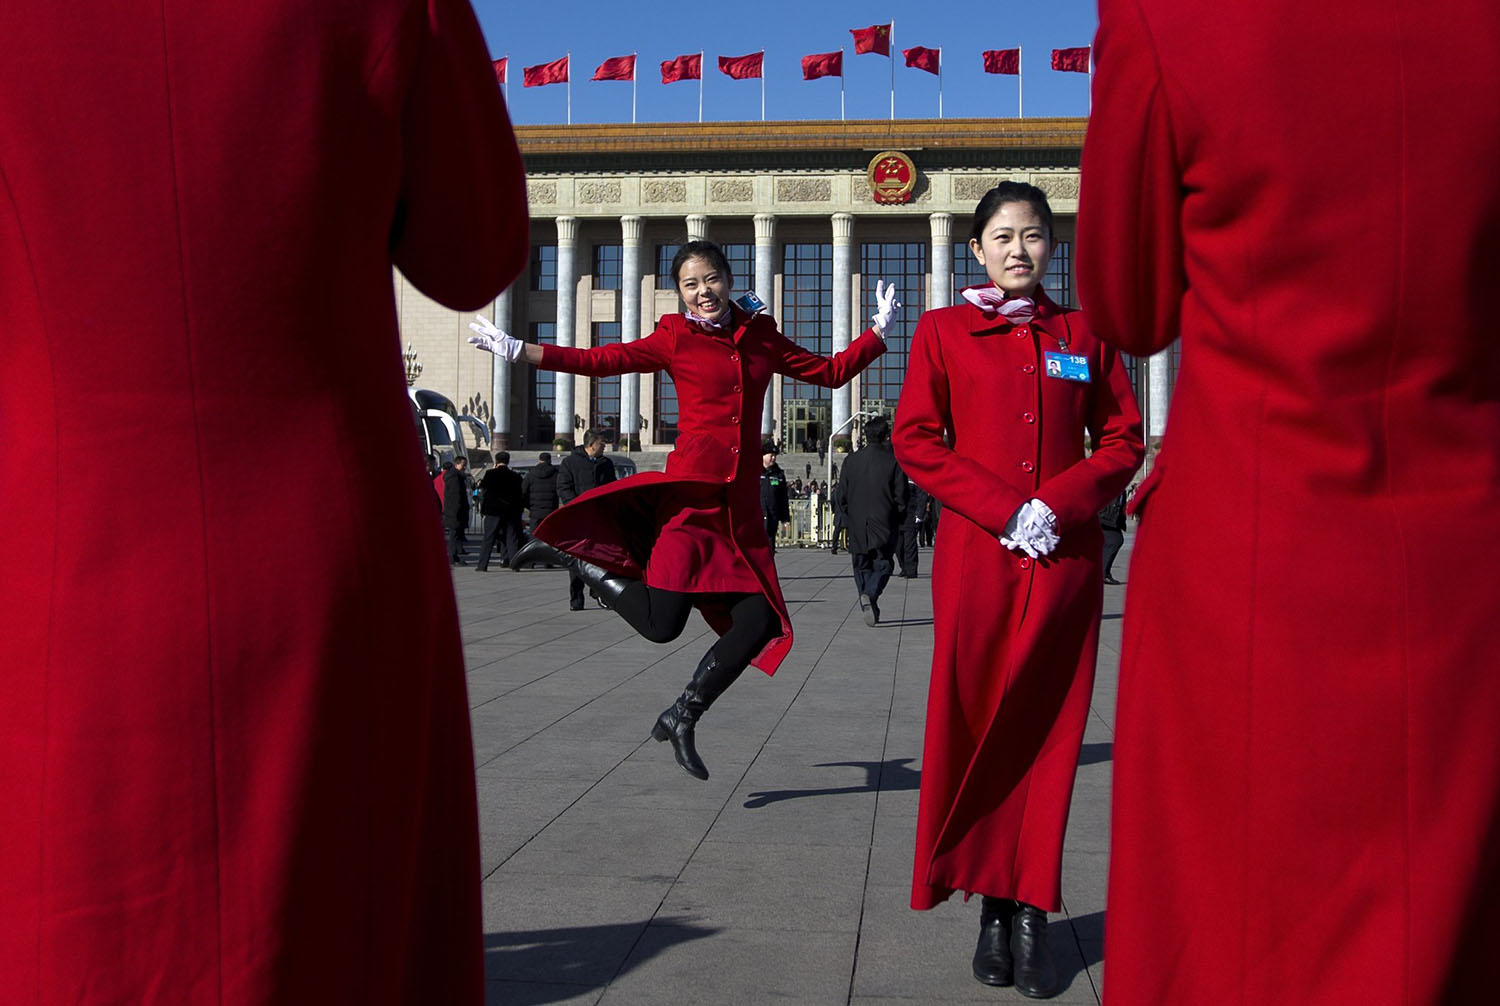 Mar. 4, 2014. Chinese hostesses, who serve the delegates of the Chinese People's Political Consultative Conference and National People's Congress, have souvenir photos taken in front of the Great Hall of the People during sessions in Beijing, China.